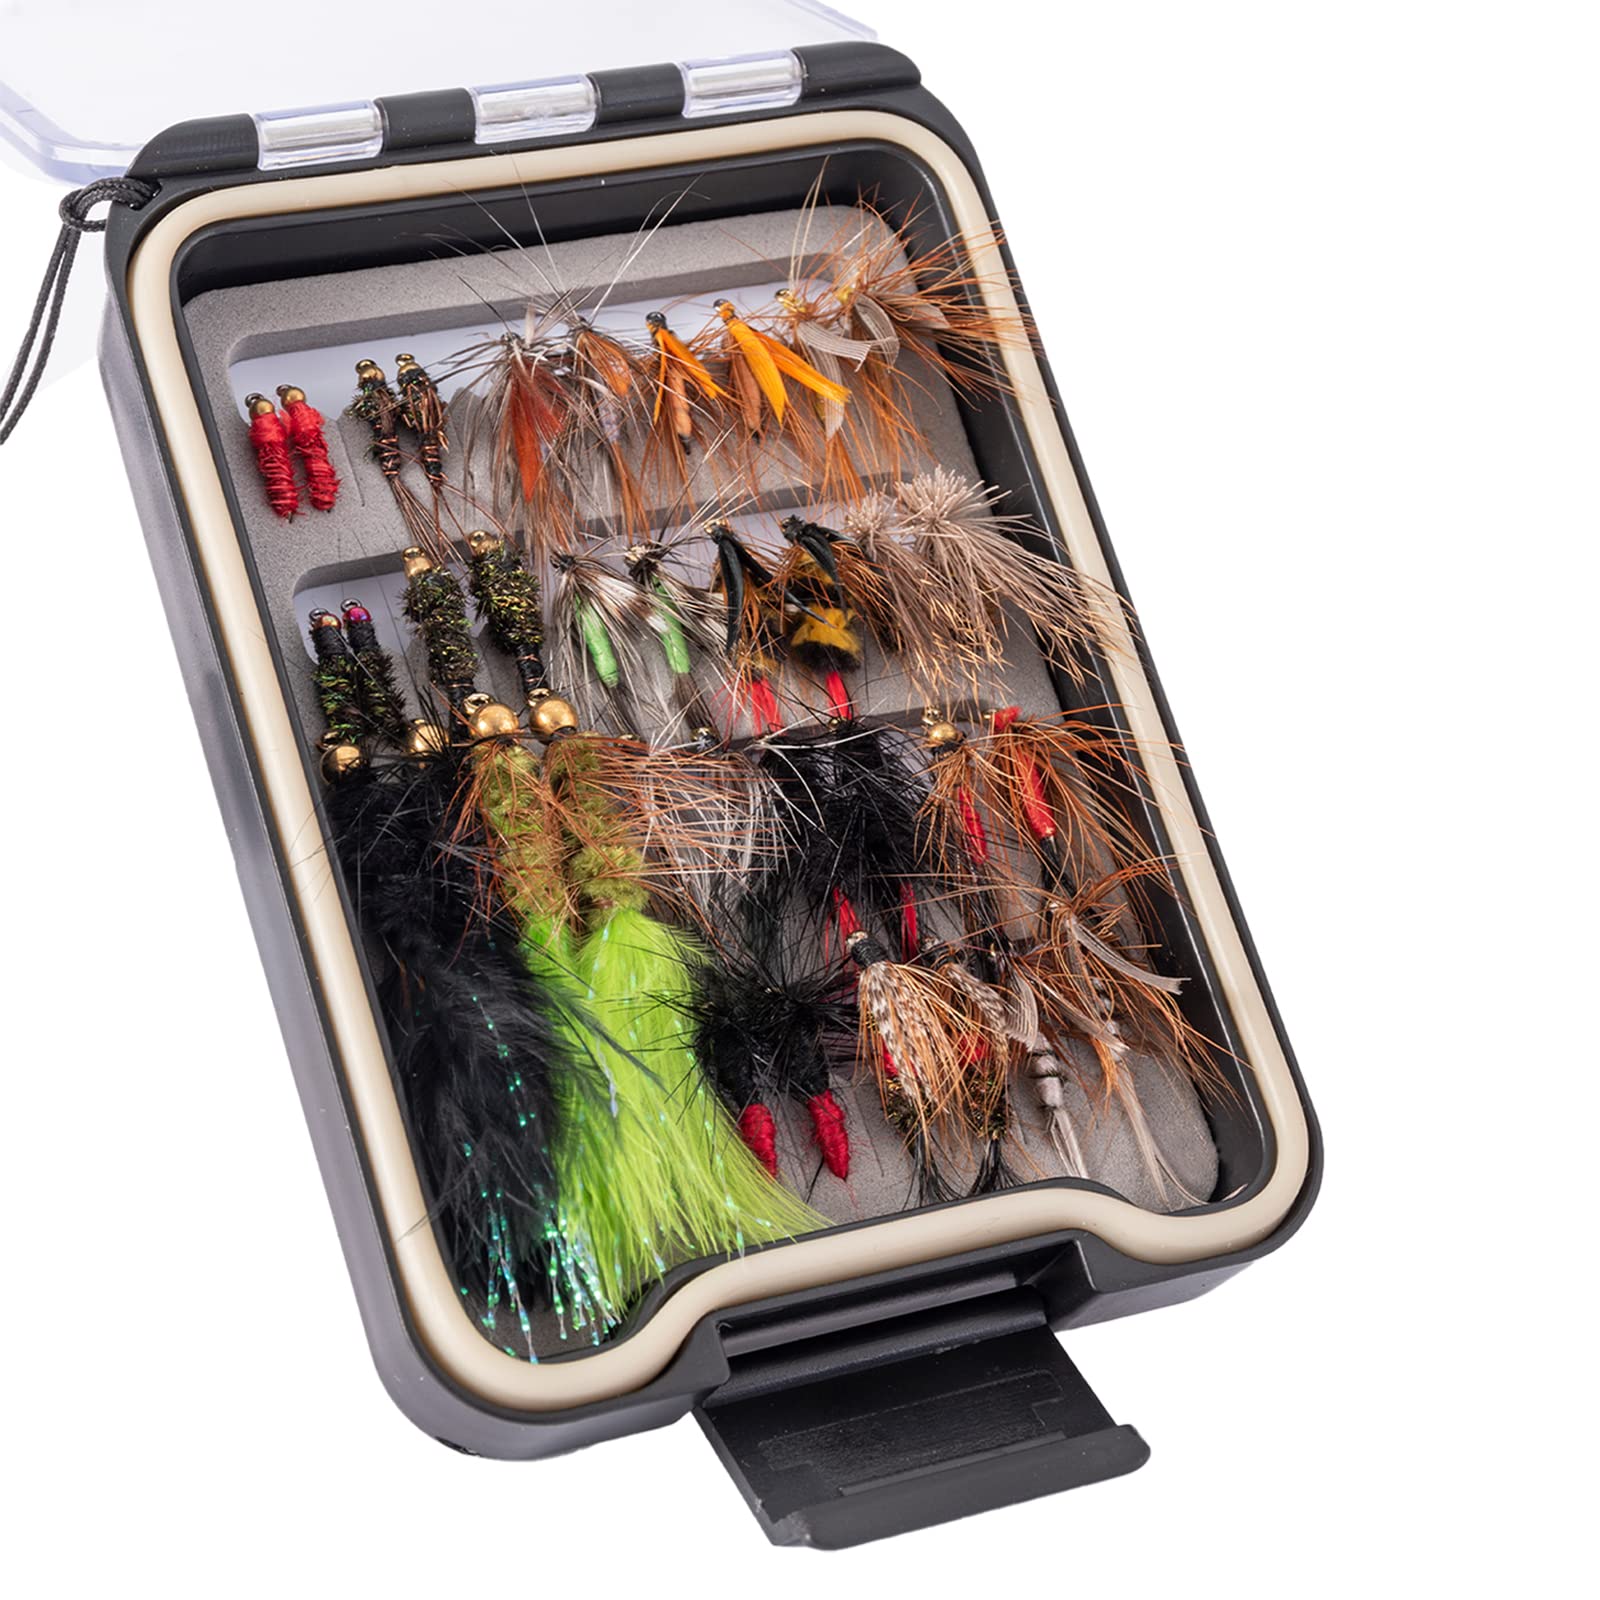 Fishing Lure Box,Fly Fishing Box Waterproof Waterproof Fly Fishing Box  Fishing Flies Box Highly Recommended 